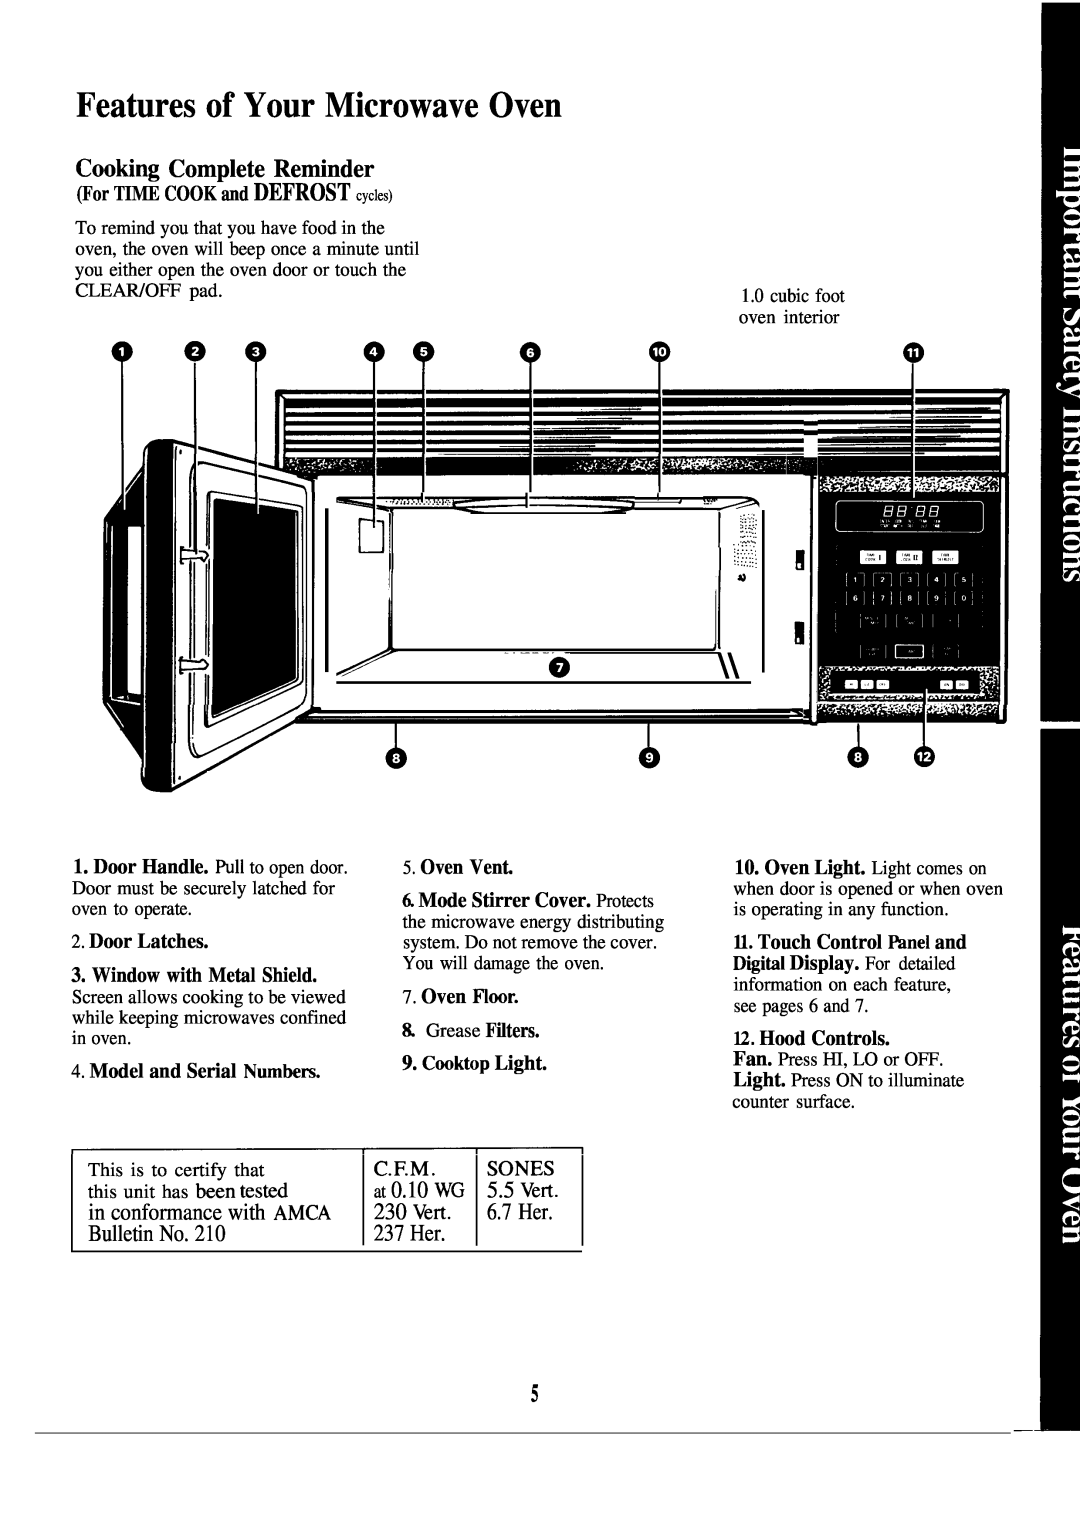 GE 164 D20~PO19 Features of Your Microwave Oven, ‘--b, Cooting Complete Reminder, ’‘”’”’--’ ~ ‘ ‘, Model and Serial Numkrs 